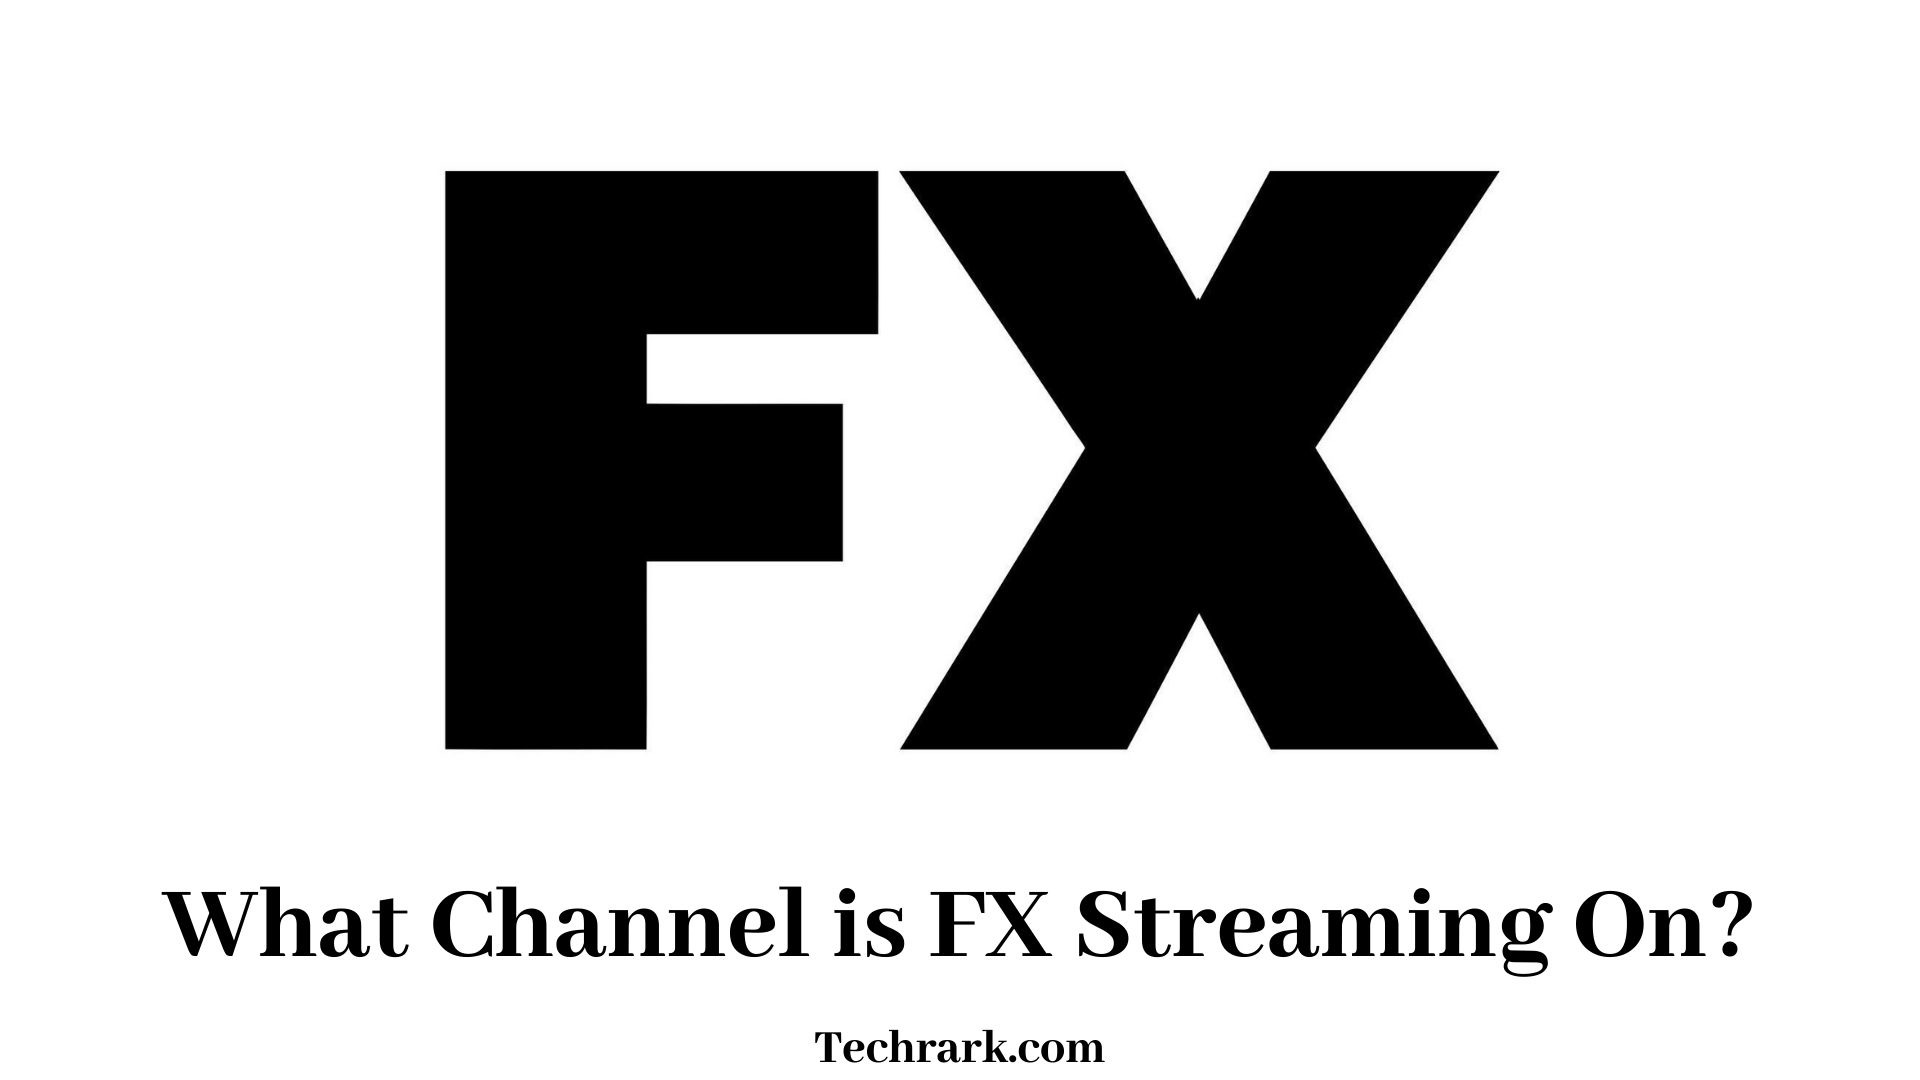 What Channel is FX